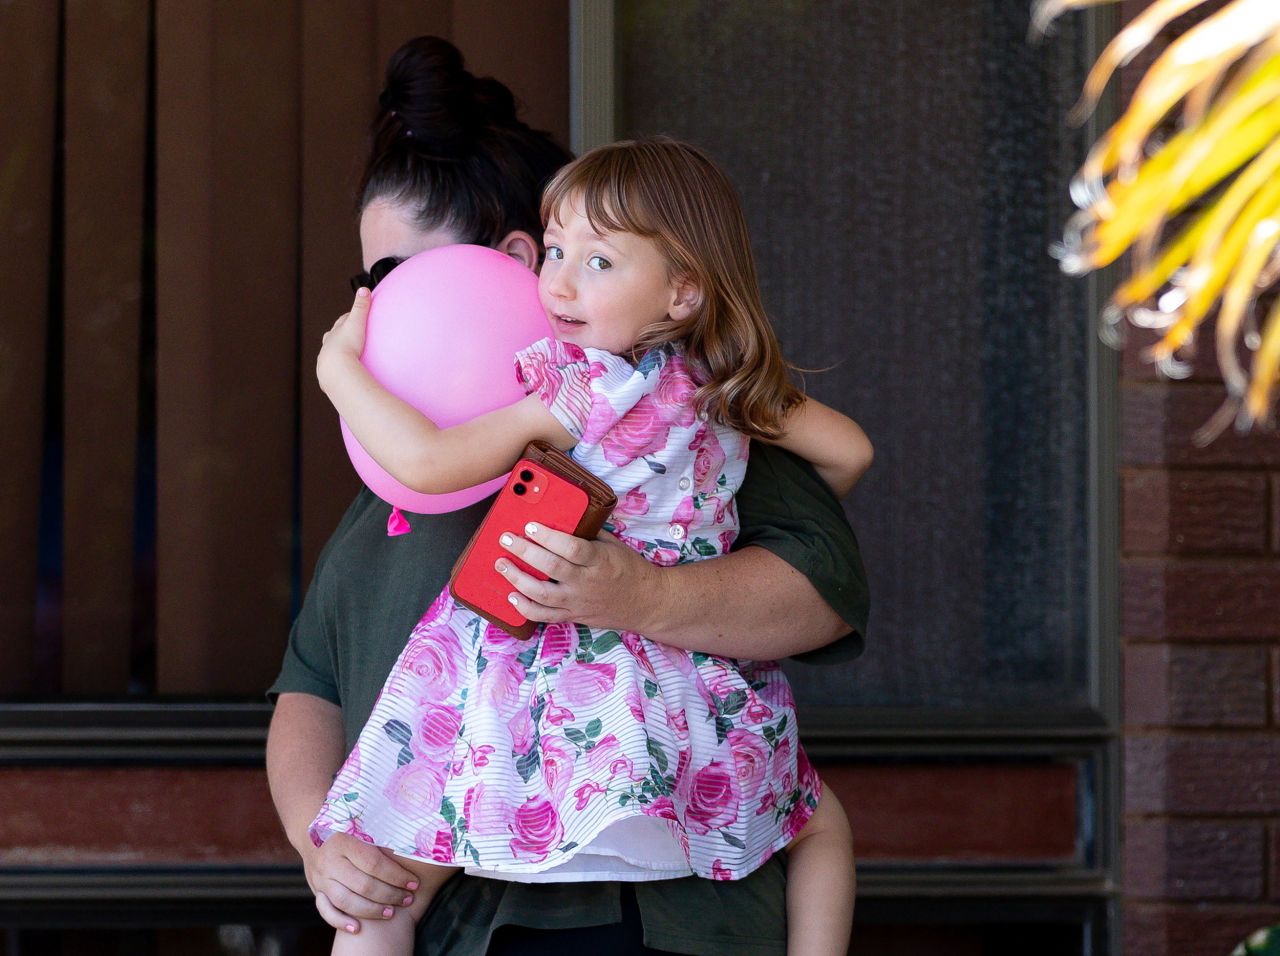 Cleo Smith and her mother Ellie Smith leave a house where they spent the night after the 4-year-old was rescued in Carnarvon, Australia, on Thursday, November 4. <a href="https://www.cnn.com/2021/11/04/world/cleo-smith-man-charged-intl-hnk/index.html" target="_blank">Cleo was found by police</a> in the early hours of November 3 in a locked house in Carnarvon, a town in the state of Western Australia, some 30 miles from the campsite where she was apparently abducted close to three weeks ago. Terence Kelly was charged with various offenses including "forcibly taking a child under 16."